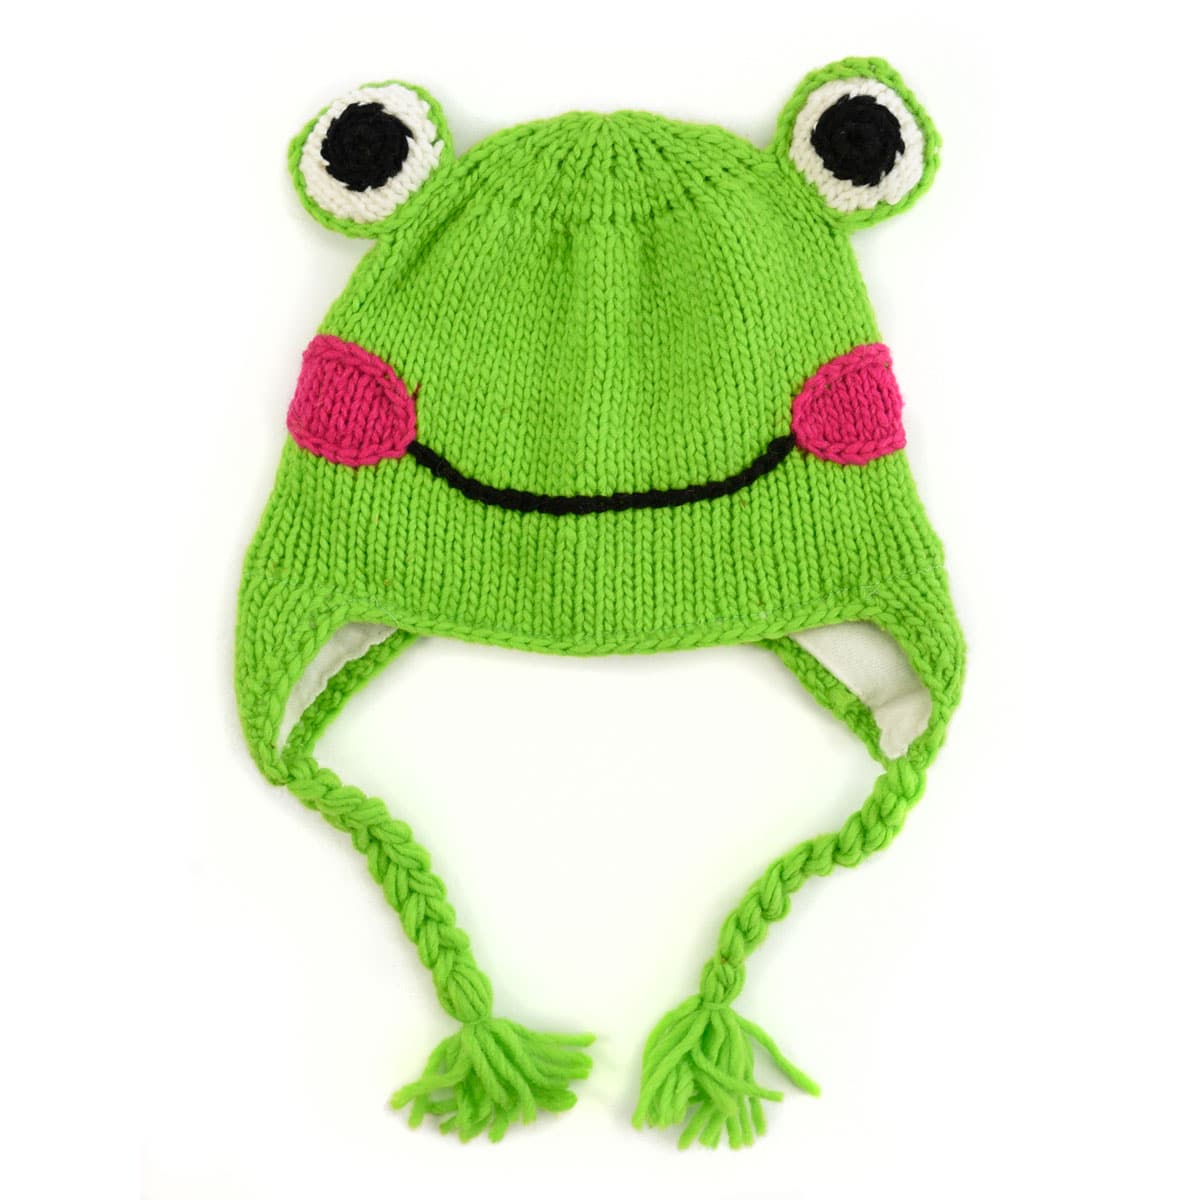 Green hat with a frog face and eyes on the top of the hat